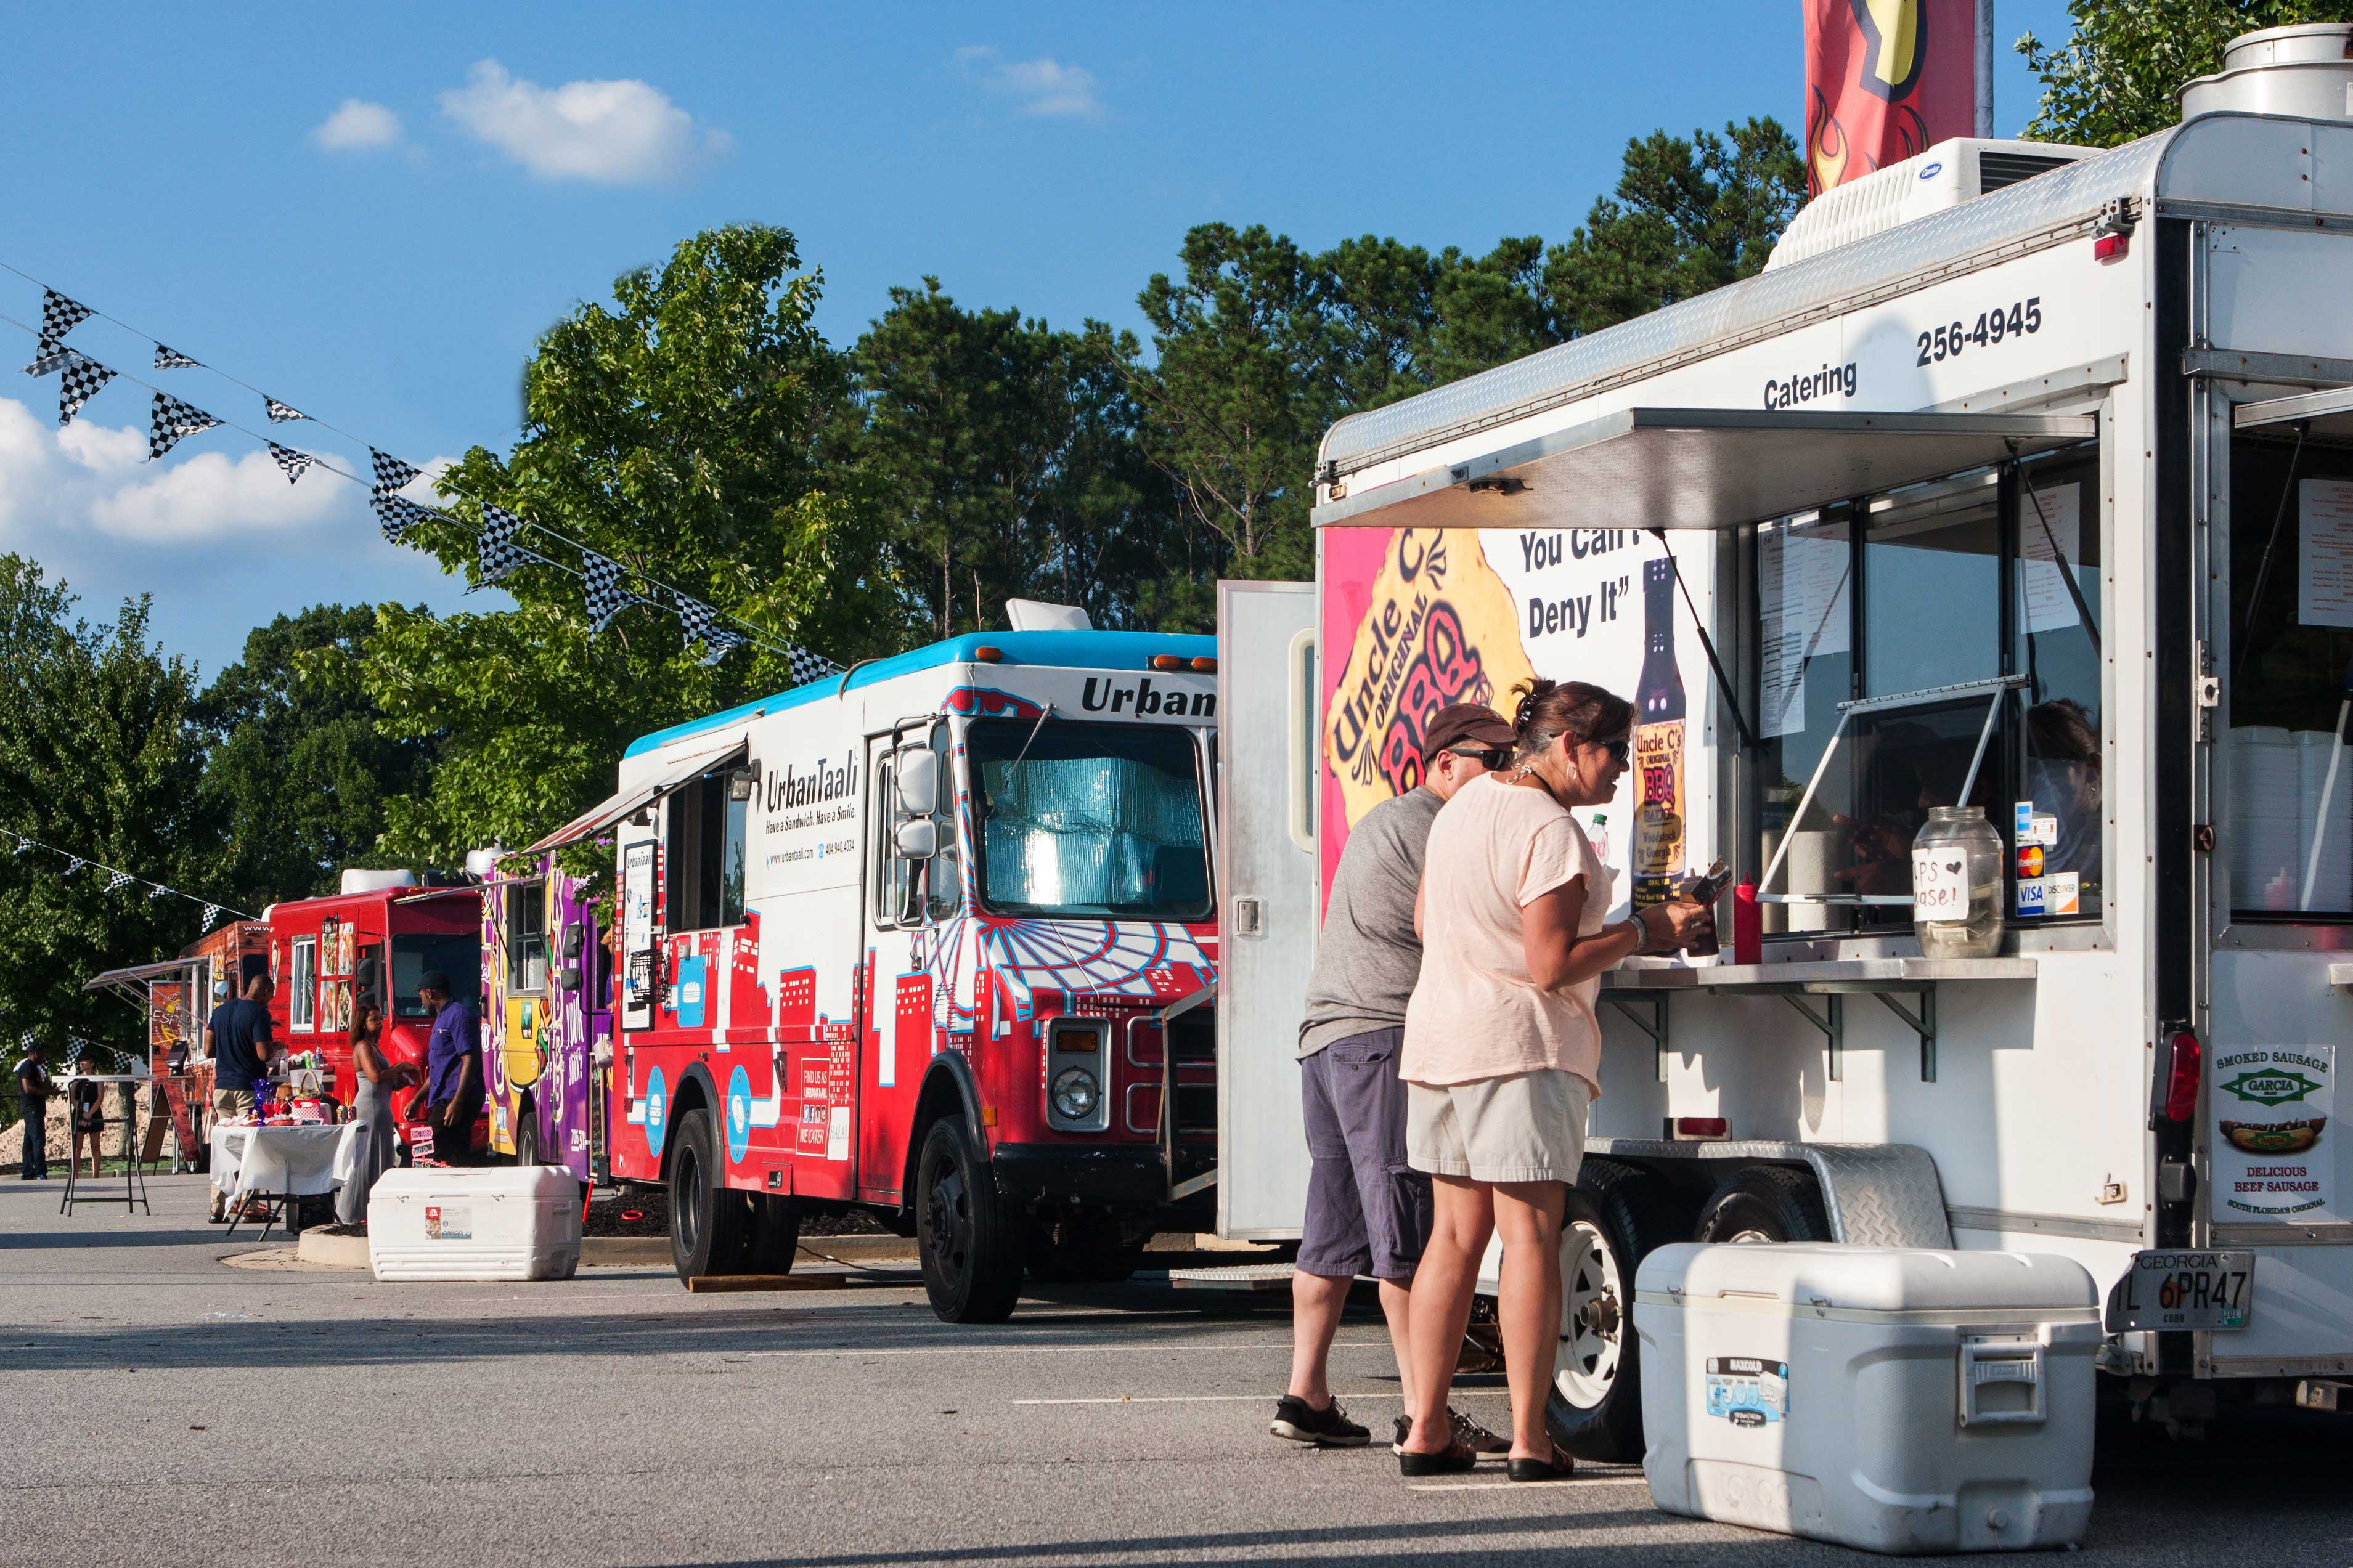 A series of food trucks lined up at a community event.